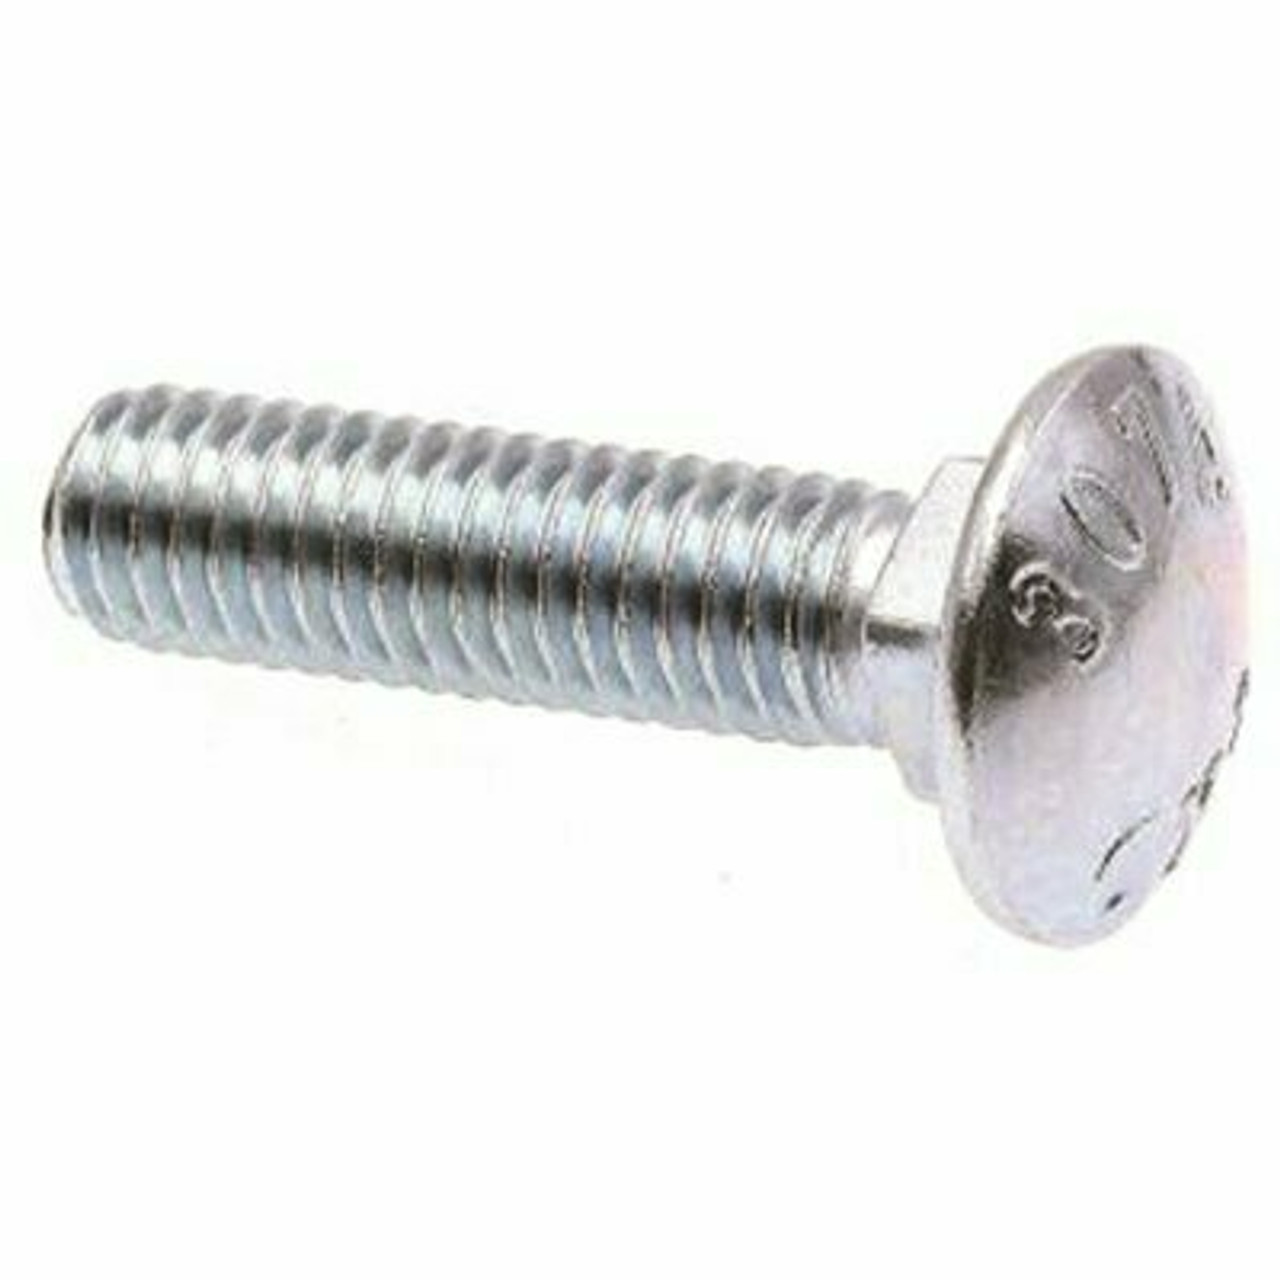 3/8 In.-16 X 3-1/2 In. Zinc Plated Carriage Bolts (50 Per Pack)